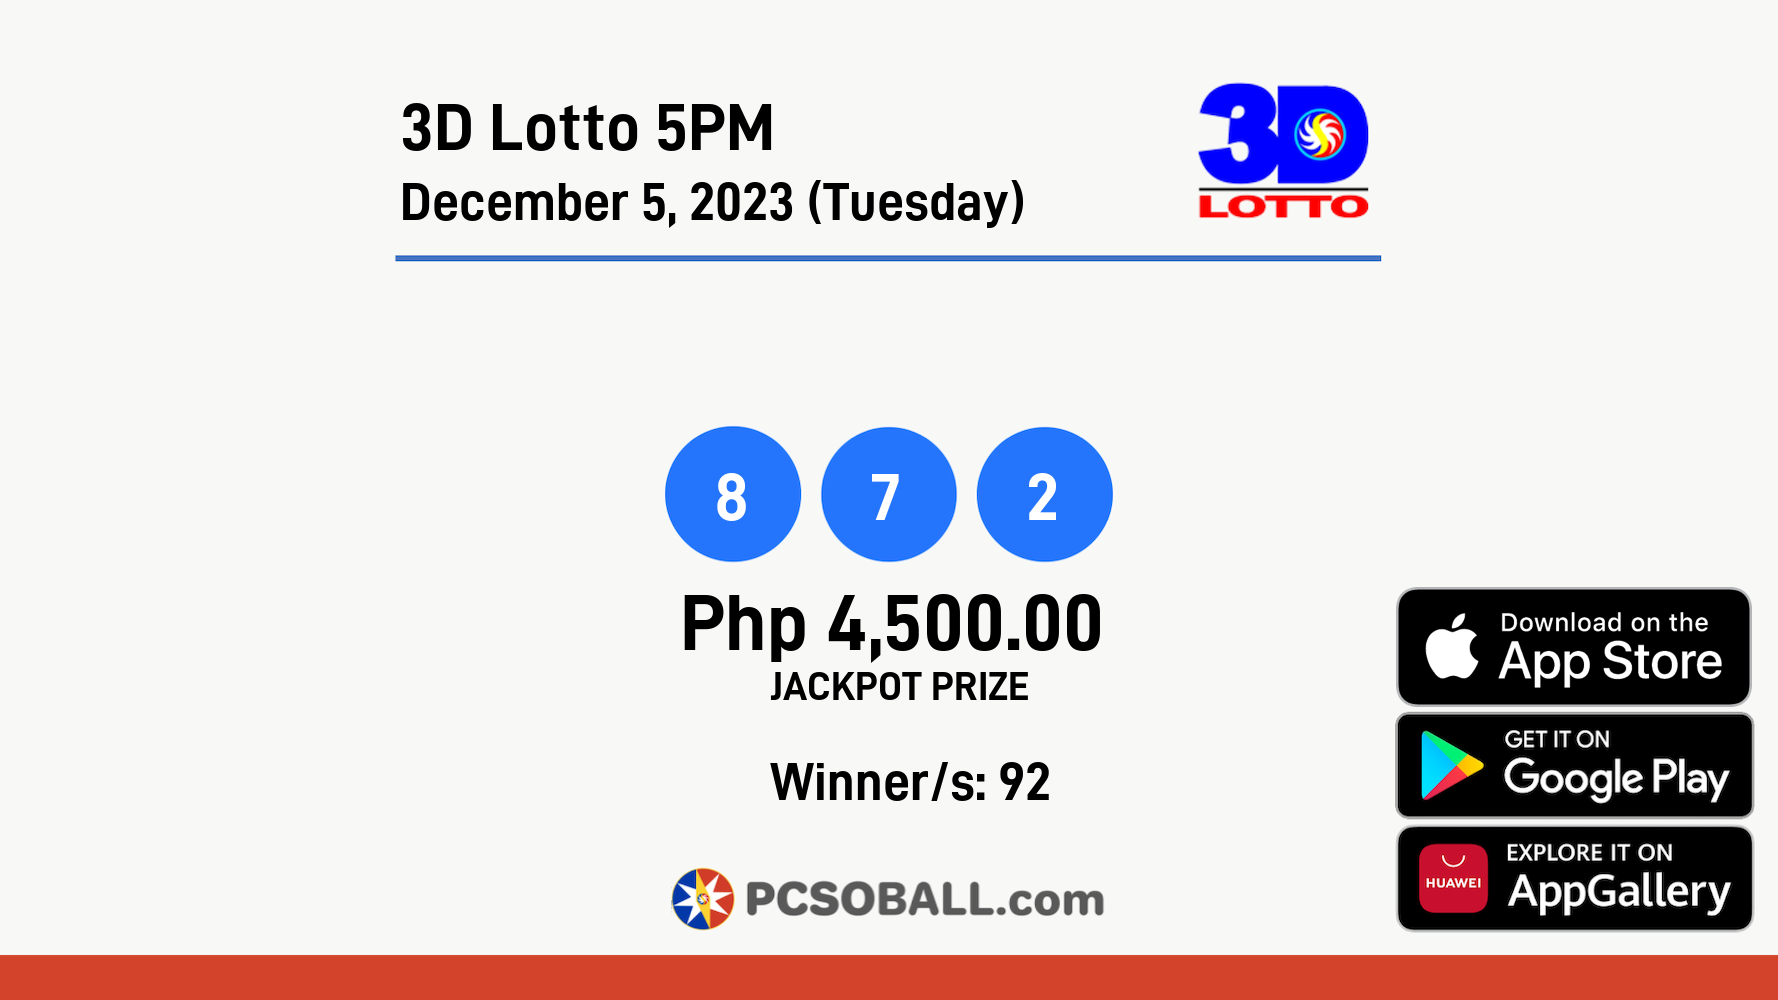 3D Lotto 5PM December 5, 2023 (Tuesday) Result